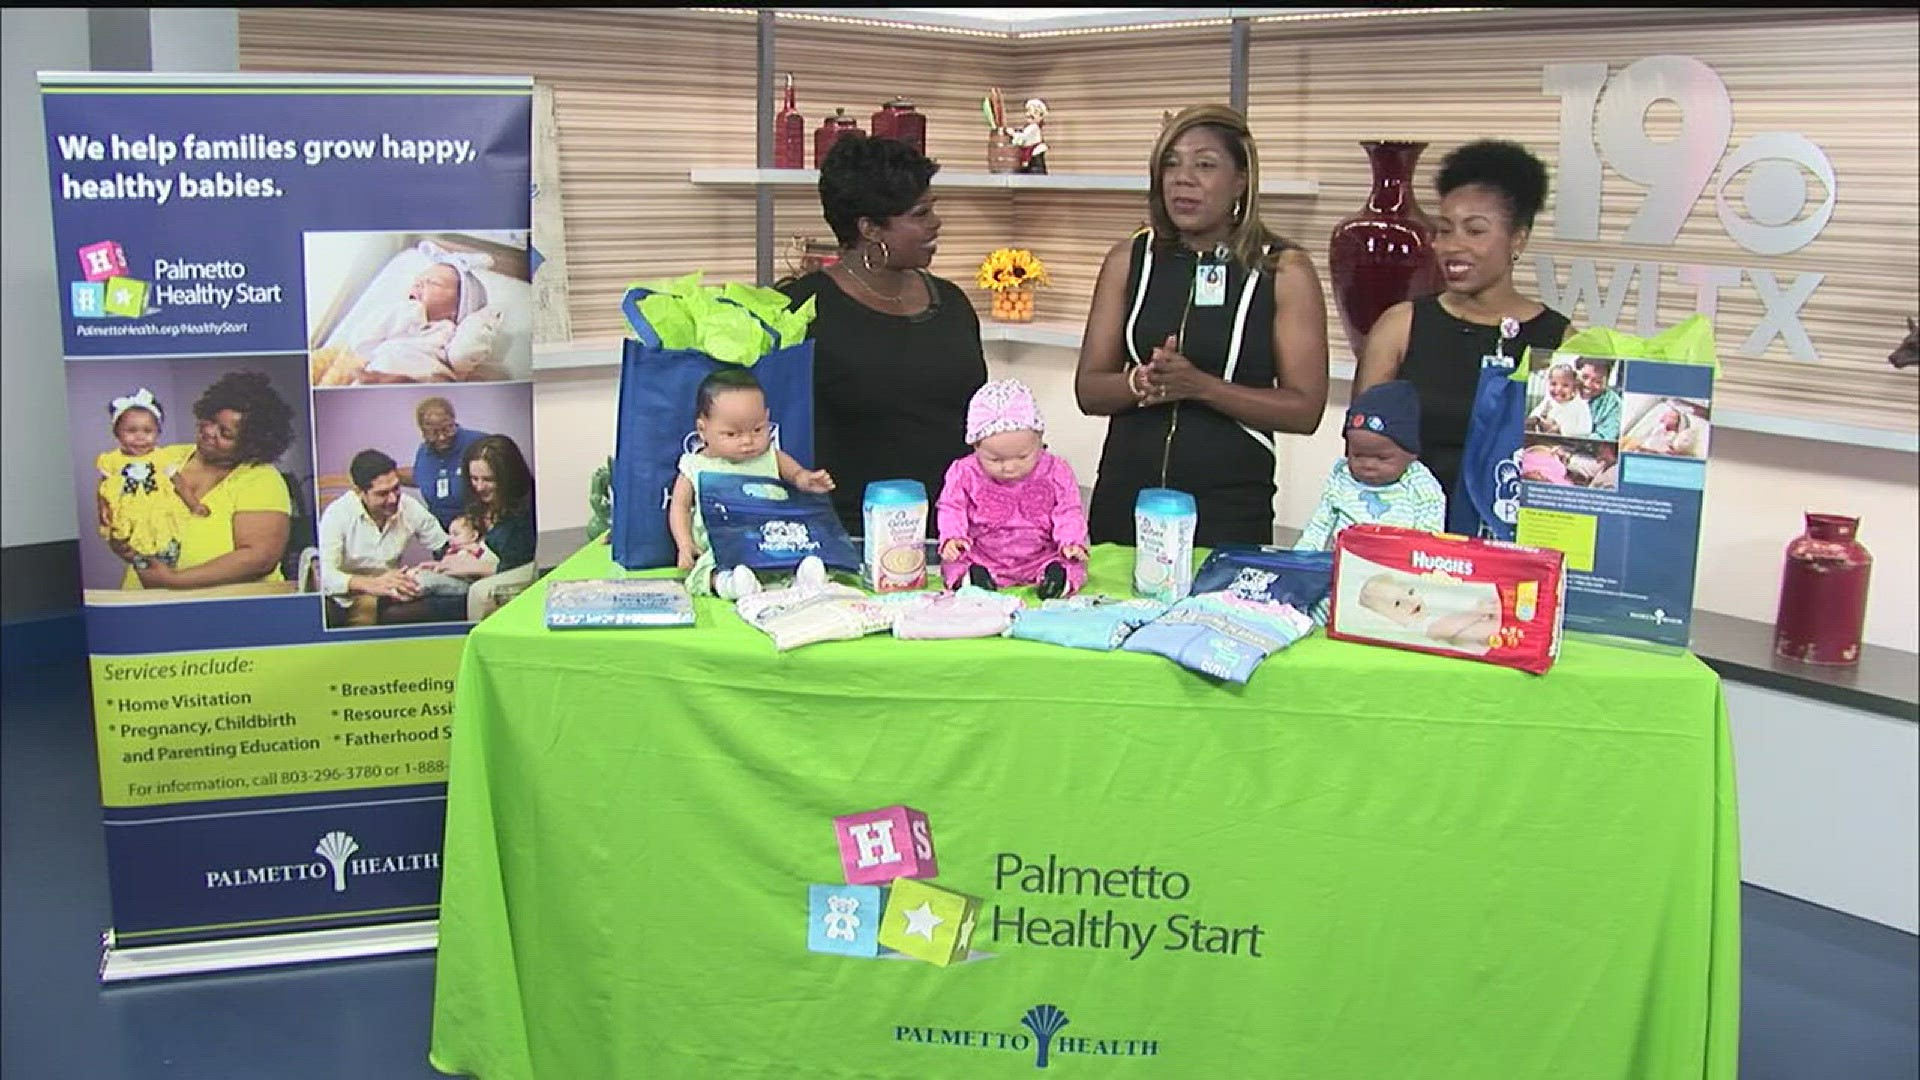 Palmetto Healthy Start will host a Baby Fair Extravaganza from 9:30 a.m. - 2 p.m. on Thursday, May 11 at 4900 Broad River Road. For more information about the event or prenatal care, contact Palmetto Healthy Start at 803-296-3780 or 888-788-4367.